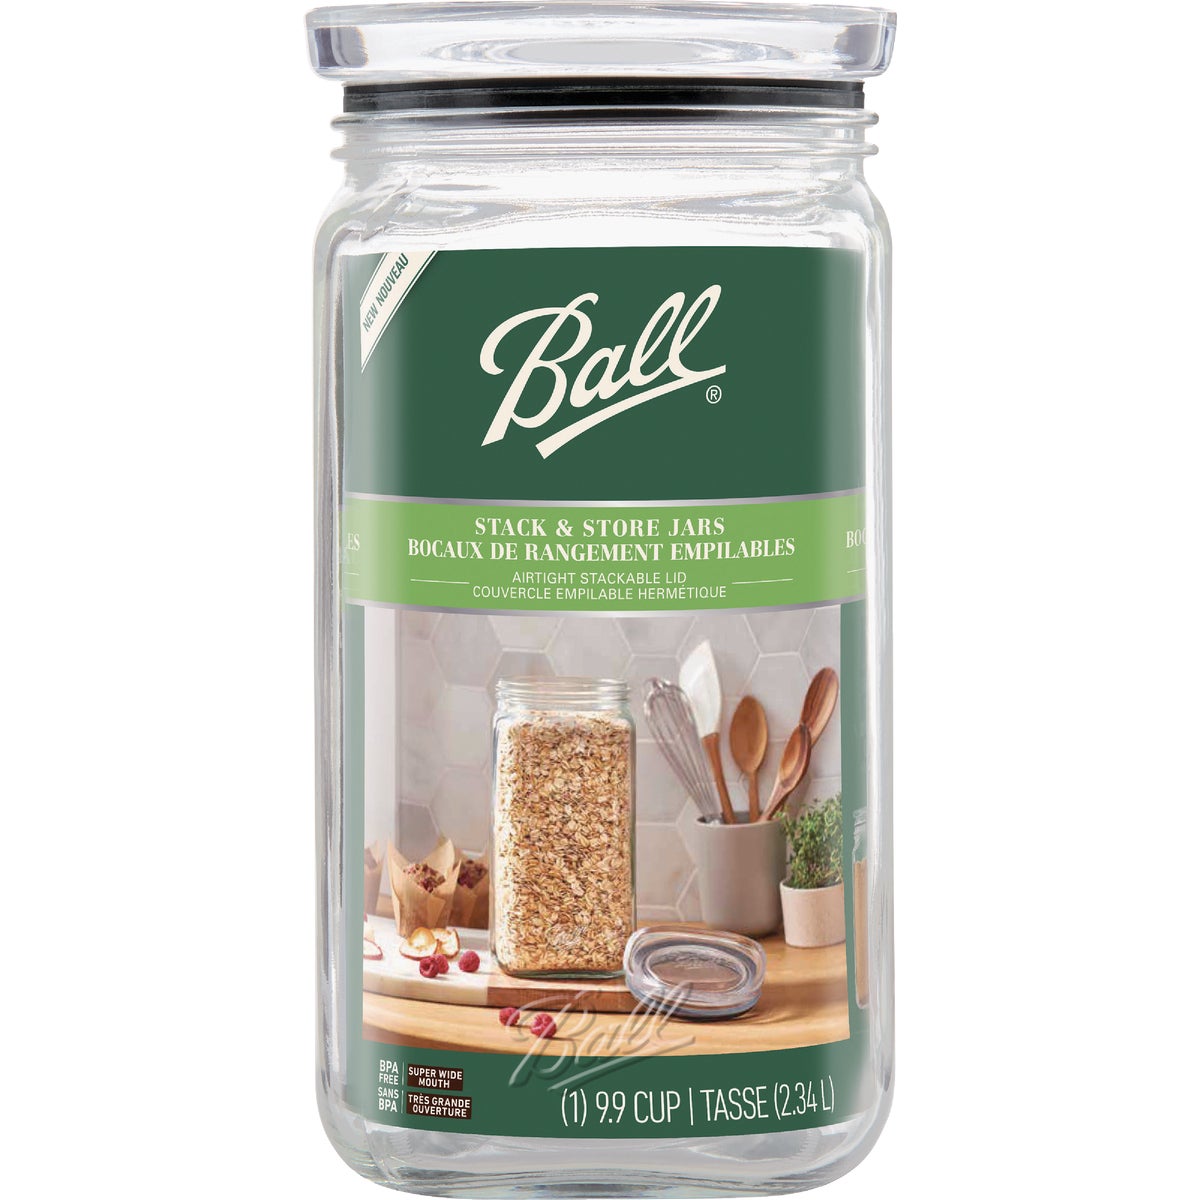 Ball 2133566 Ball 1/2 Gal. Stack & Store Jar 2133566 Pack of 3